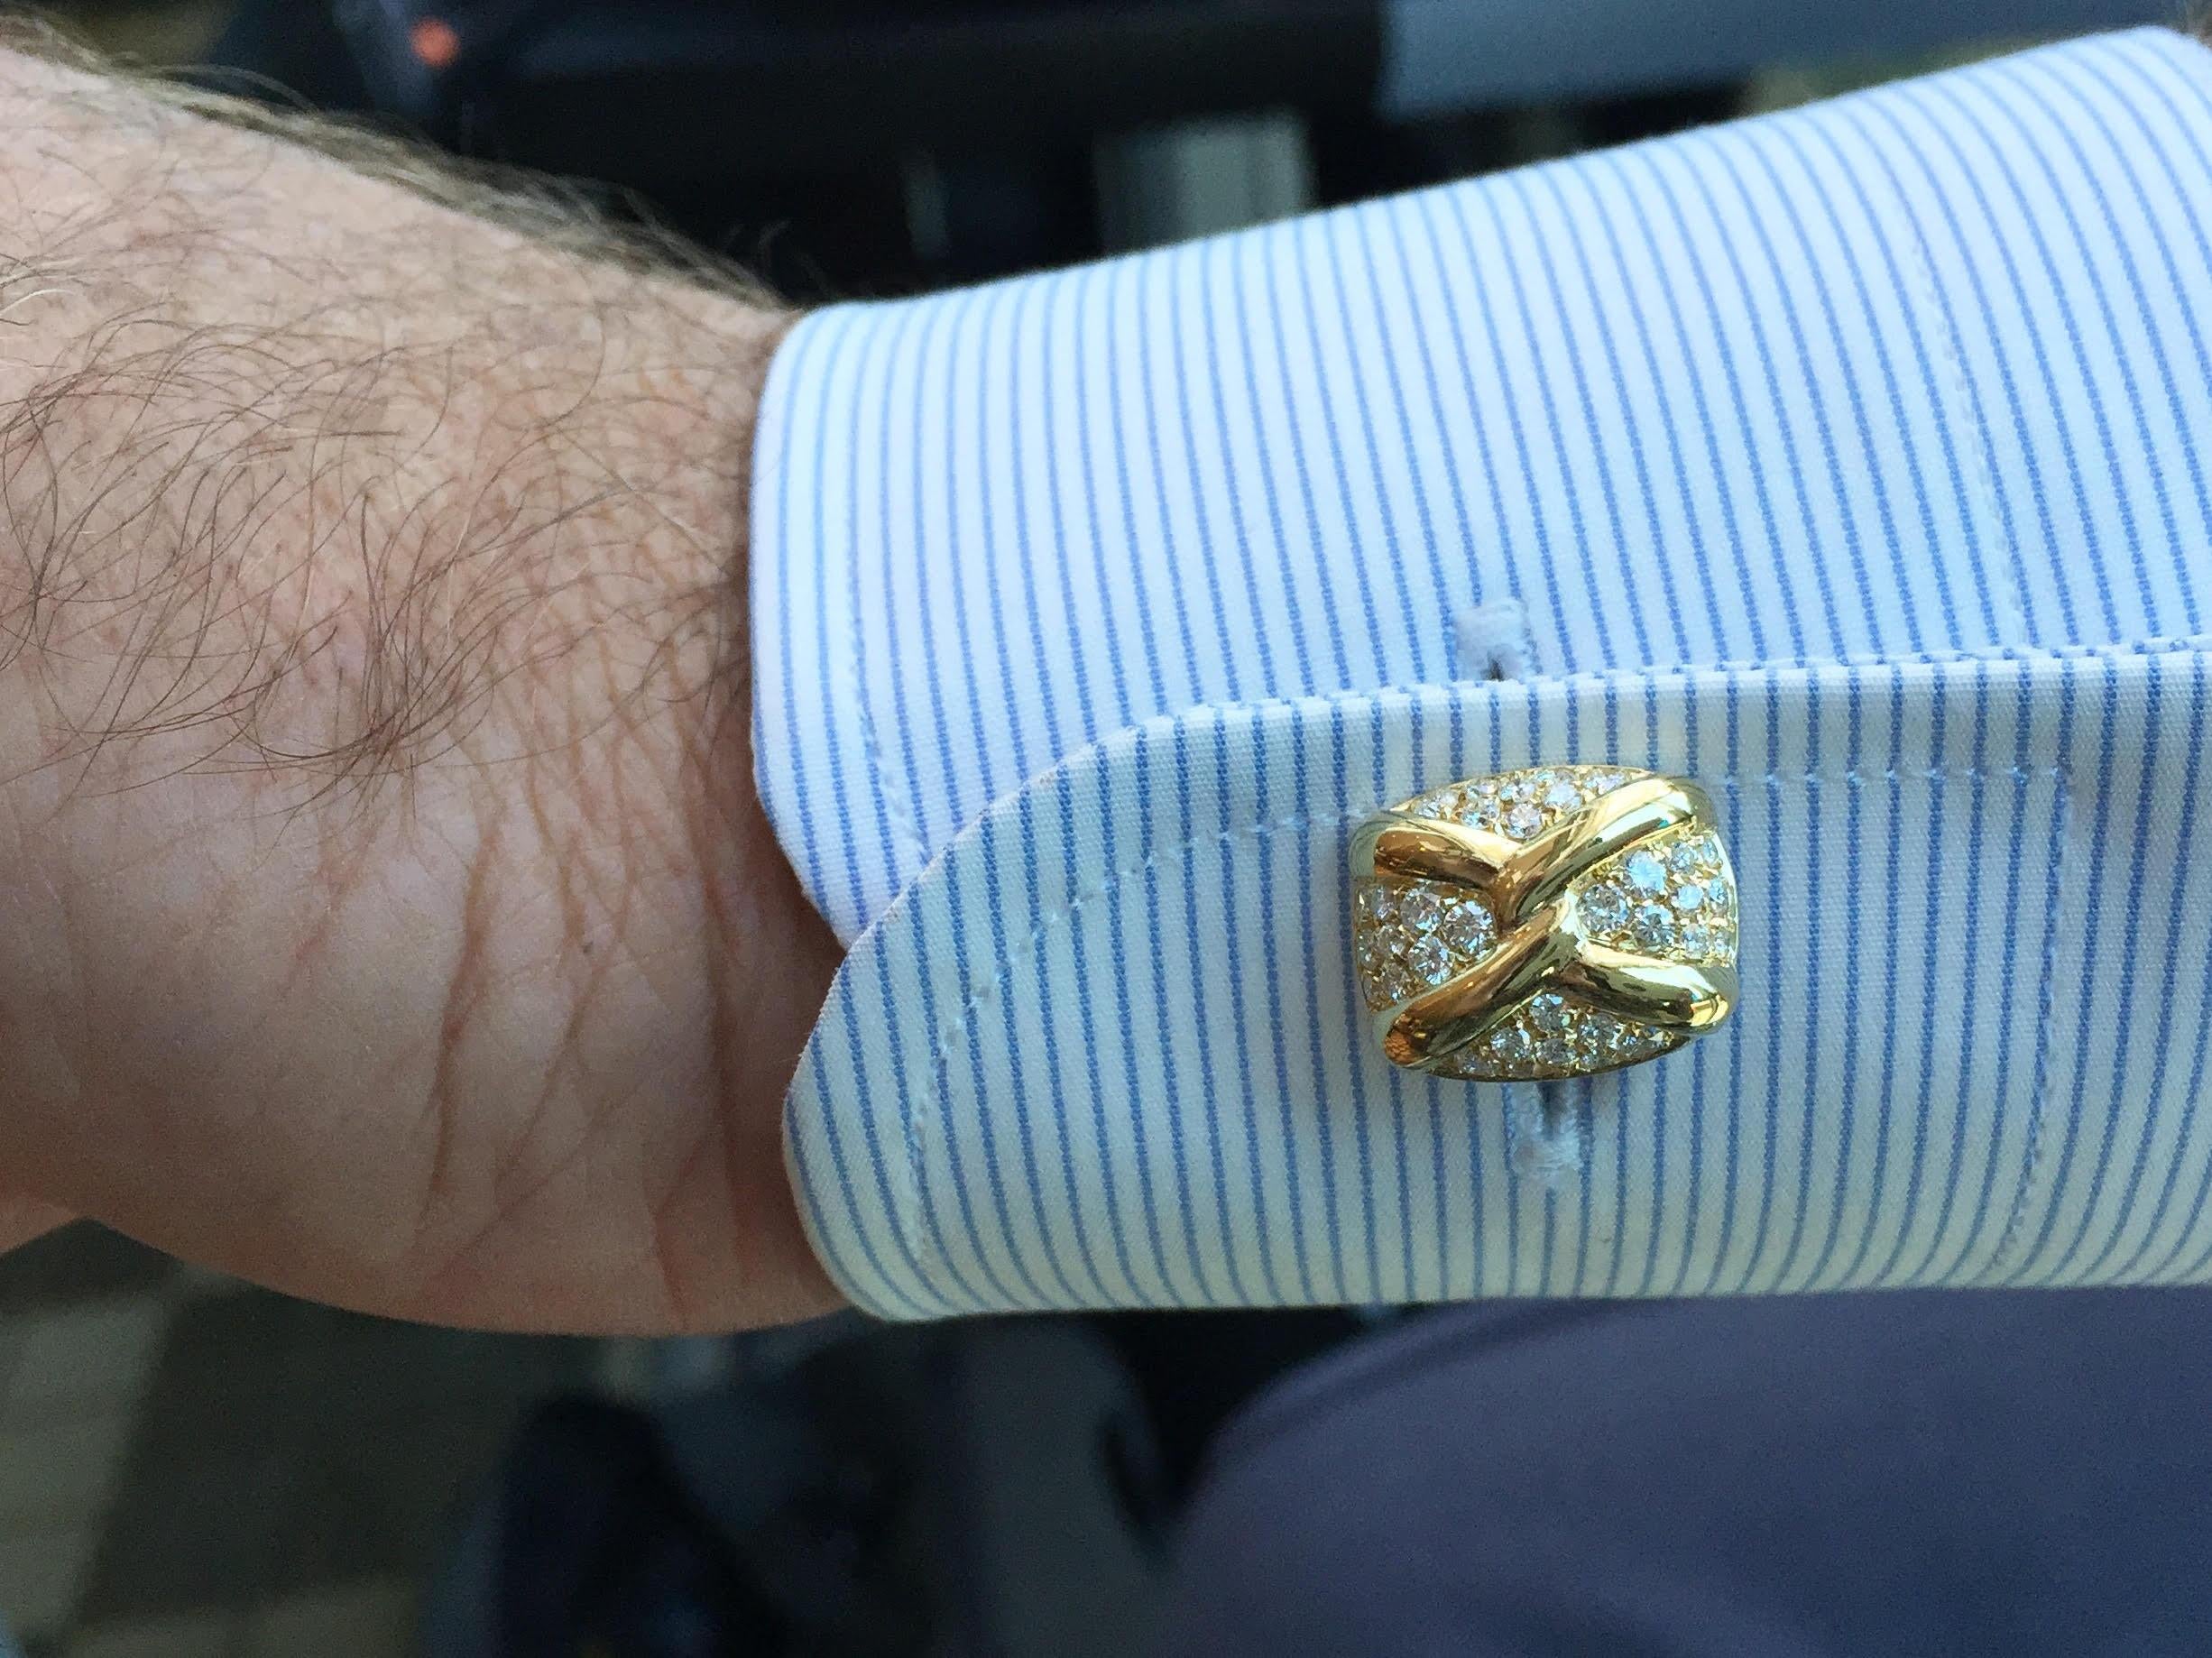 Exquisite quality and style by jewelry designer, Giovane. These vintage 18 karat yellow gold X design cuff links are adorned with 1.61 carats of round brilliant diamonds (approximately F color, VS clarity). The toggle clasp part of the cuff link